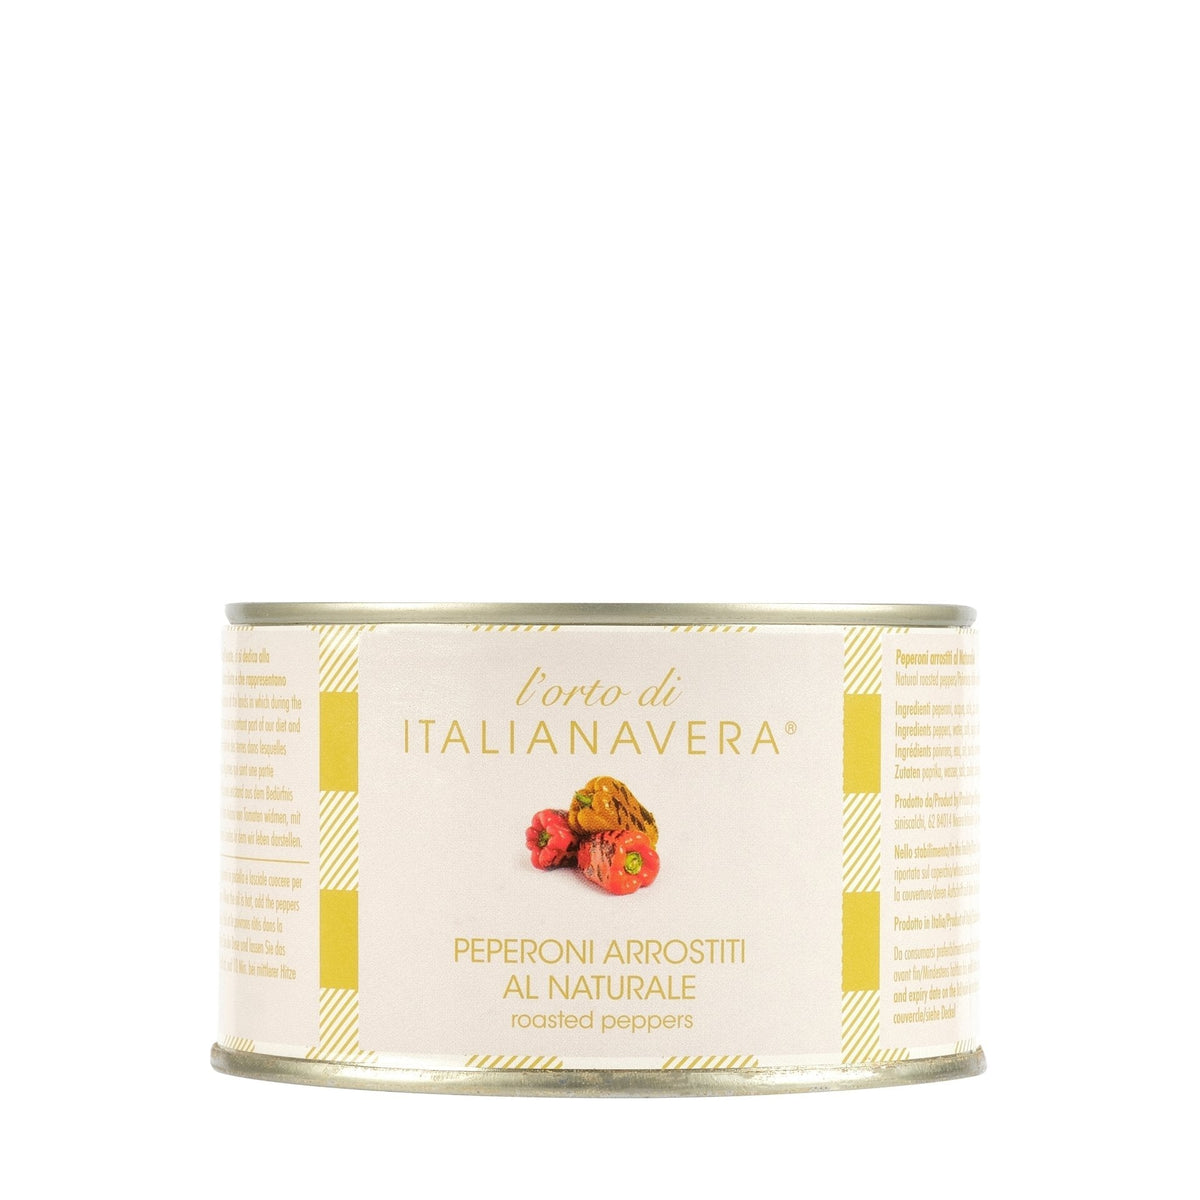 Italianavera Roasted Peppers 400g  | Imported and distributed in the UK by Just Gourmet Foods